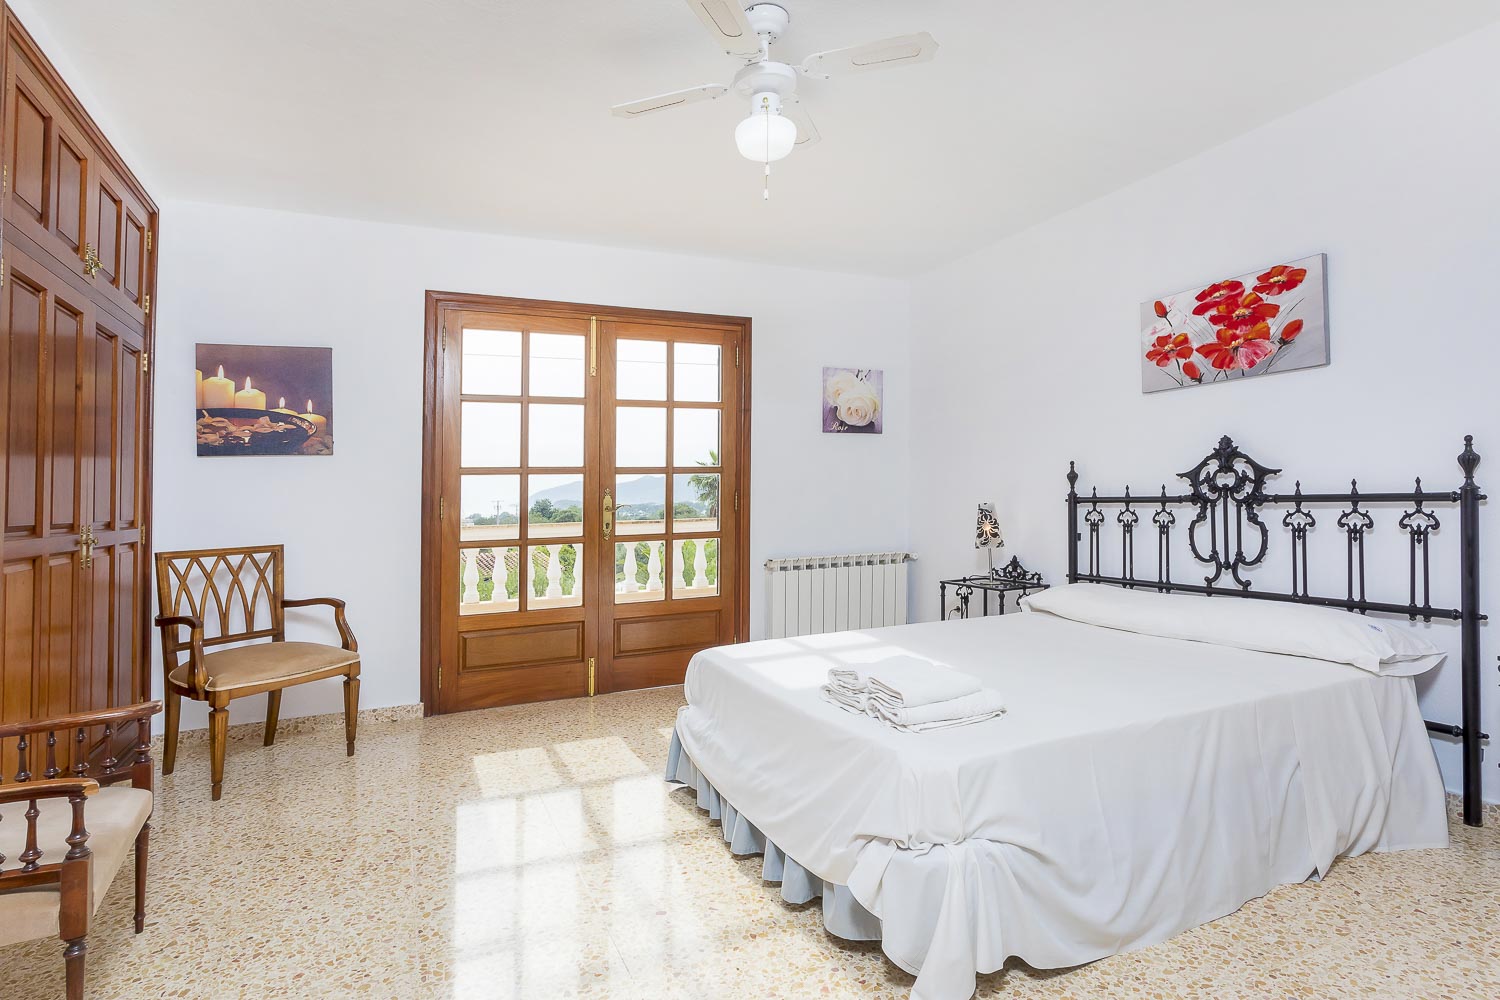 Double bed room in a rental house in Ibiza